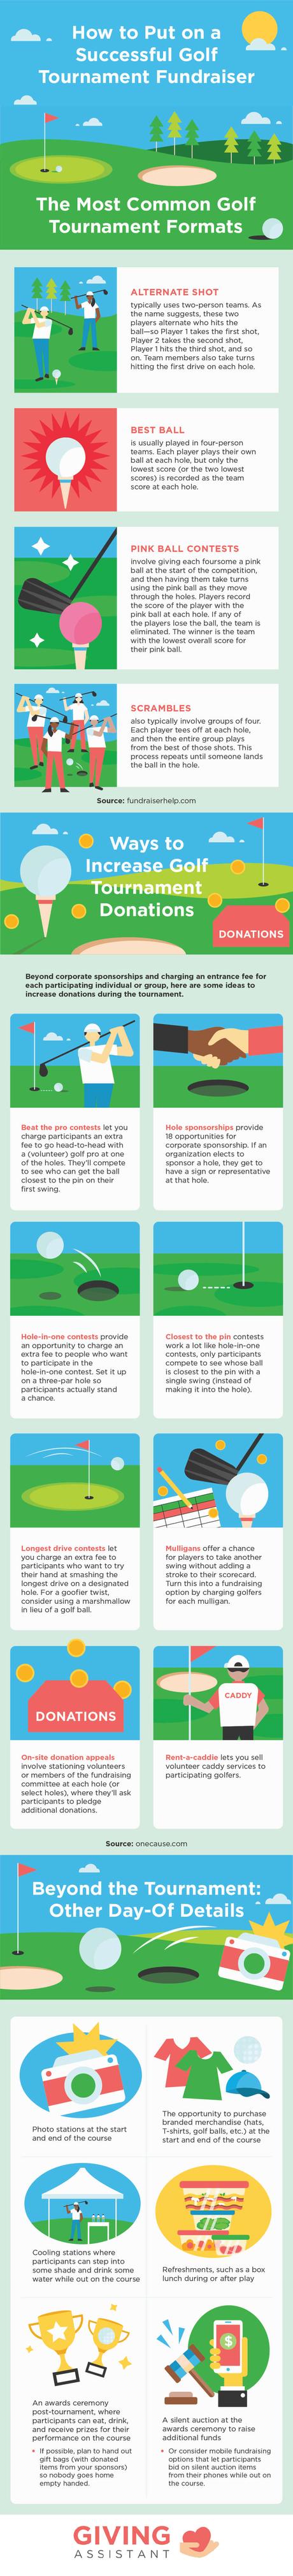 How To Run A Successful Golf Fundraiser in 7 Steps